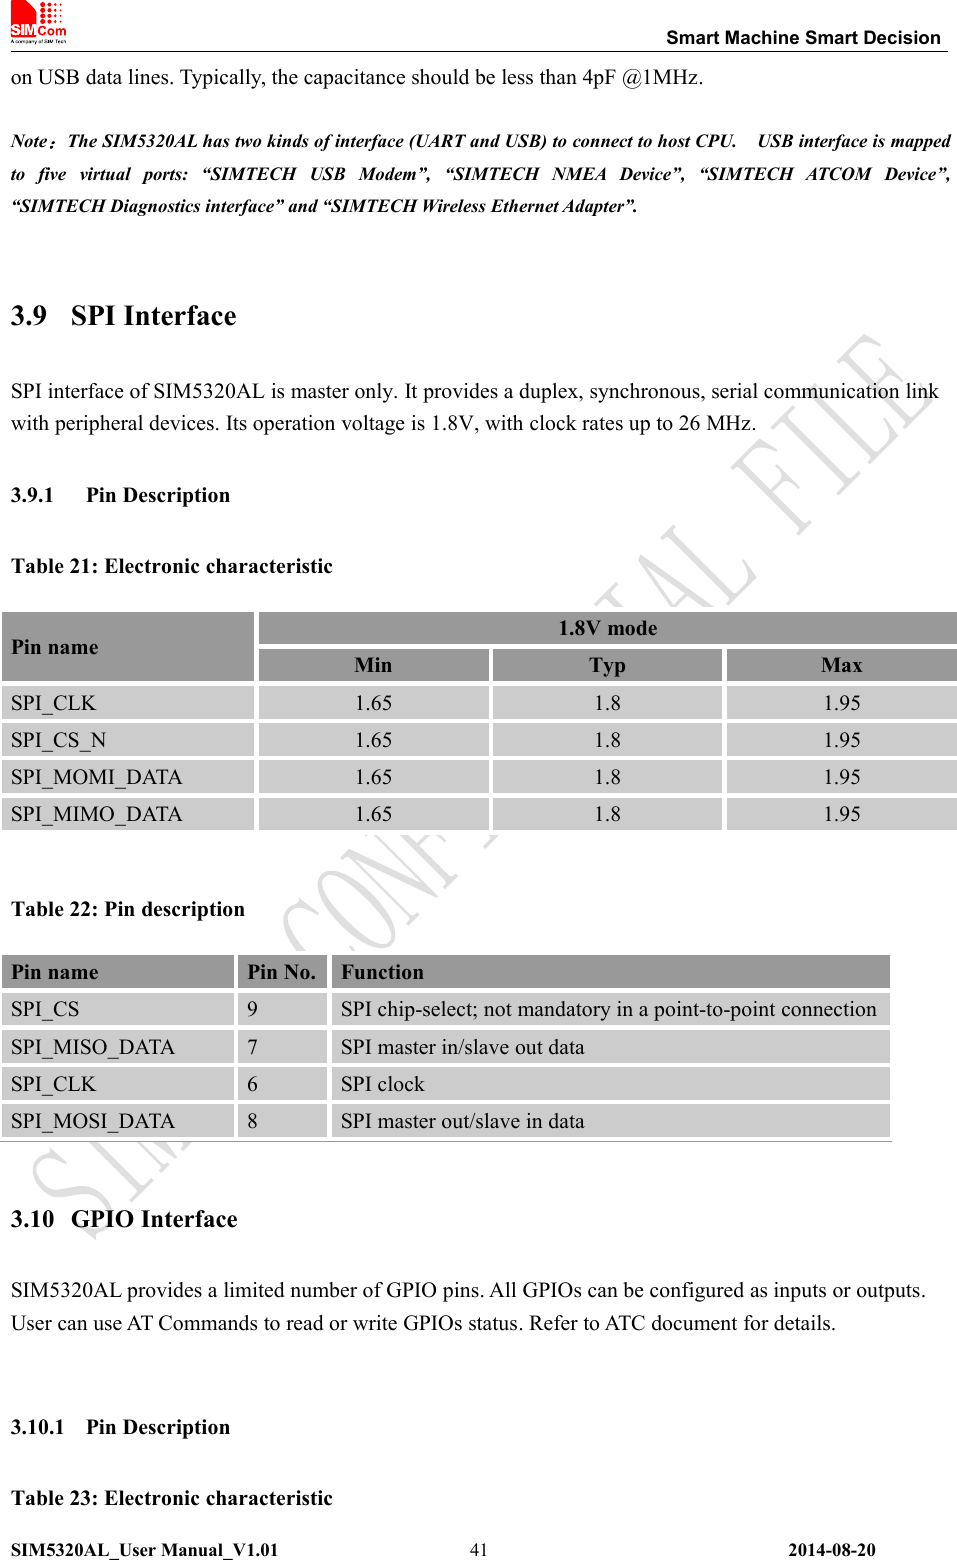 Smart Machine Smart DecisionSIM5320AL_User Manual_V1.01 2014-08-2041on USB data lines. Typically, the capacitance should be less than 4pF @1MHz.Note：The SIM5320AL has two kinds of interface (UART and USB) to connect to host CPU. USB interface is mappedto five virtual ports: “SIMTECH USB Modem”, “SIMTECH NMEA Device”, “SIMTECH ATCOM Device”,“SIMTECH Diagnostics interface” and “SIMTECH Wireless Ethernet Adapter”.3.9 SPI InterfaceSPI interface of SIM5320AL is master only. It provides a duplex, synchronous, serial communication linkwith peripheral devices. Its operation voltage is 1.8V, with clock rates up to 26 MHz.3.9.1 Pin DescriptionTable 21: Electronic characteristicPin name 1.8V modeMin Typ MaxSPI_CLK 1.65 1.8 1.95SPI_CS_N 1.65 1.8 1.95SPI_MOMI_DATA 1.65 1.8 1.95SPI_MIMO_DATA 1.65 1.8 1.95Table 22: Pin description3.10 GPIO InterfaceSIM5320AL provides a limited number of GPIO pins. All GPIOs can be configured as inputs or outputs.User can use AT Commands to read or write GPIOs status. Refer to ATC document for details.3.10.1 Pin DescriptionTable 23: Electronic characteristicPin name Pin No. FunctionSPI_CS 9 SPI chip-select; not mandatory in a point-to-point connectionSPI_MISO_DATA 7 SPI master in/slave out dataSPI_CLK 6 SPI clockSPI_MOSI_DATA 8 SPI master out/slave in data